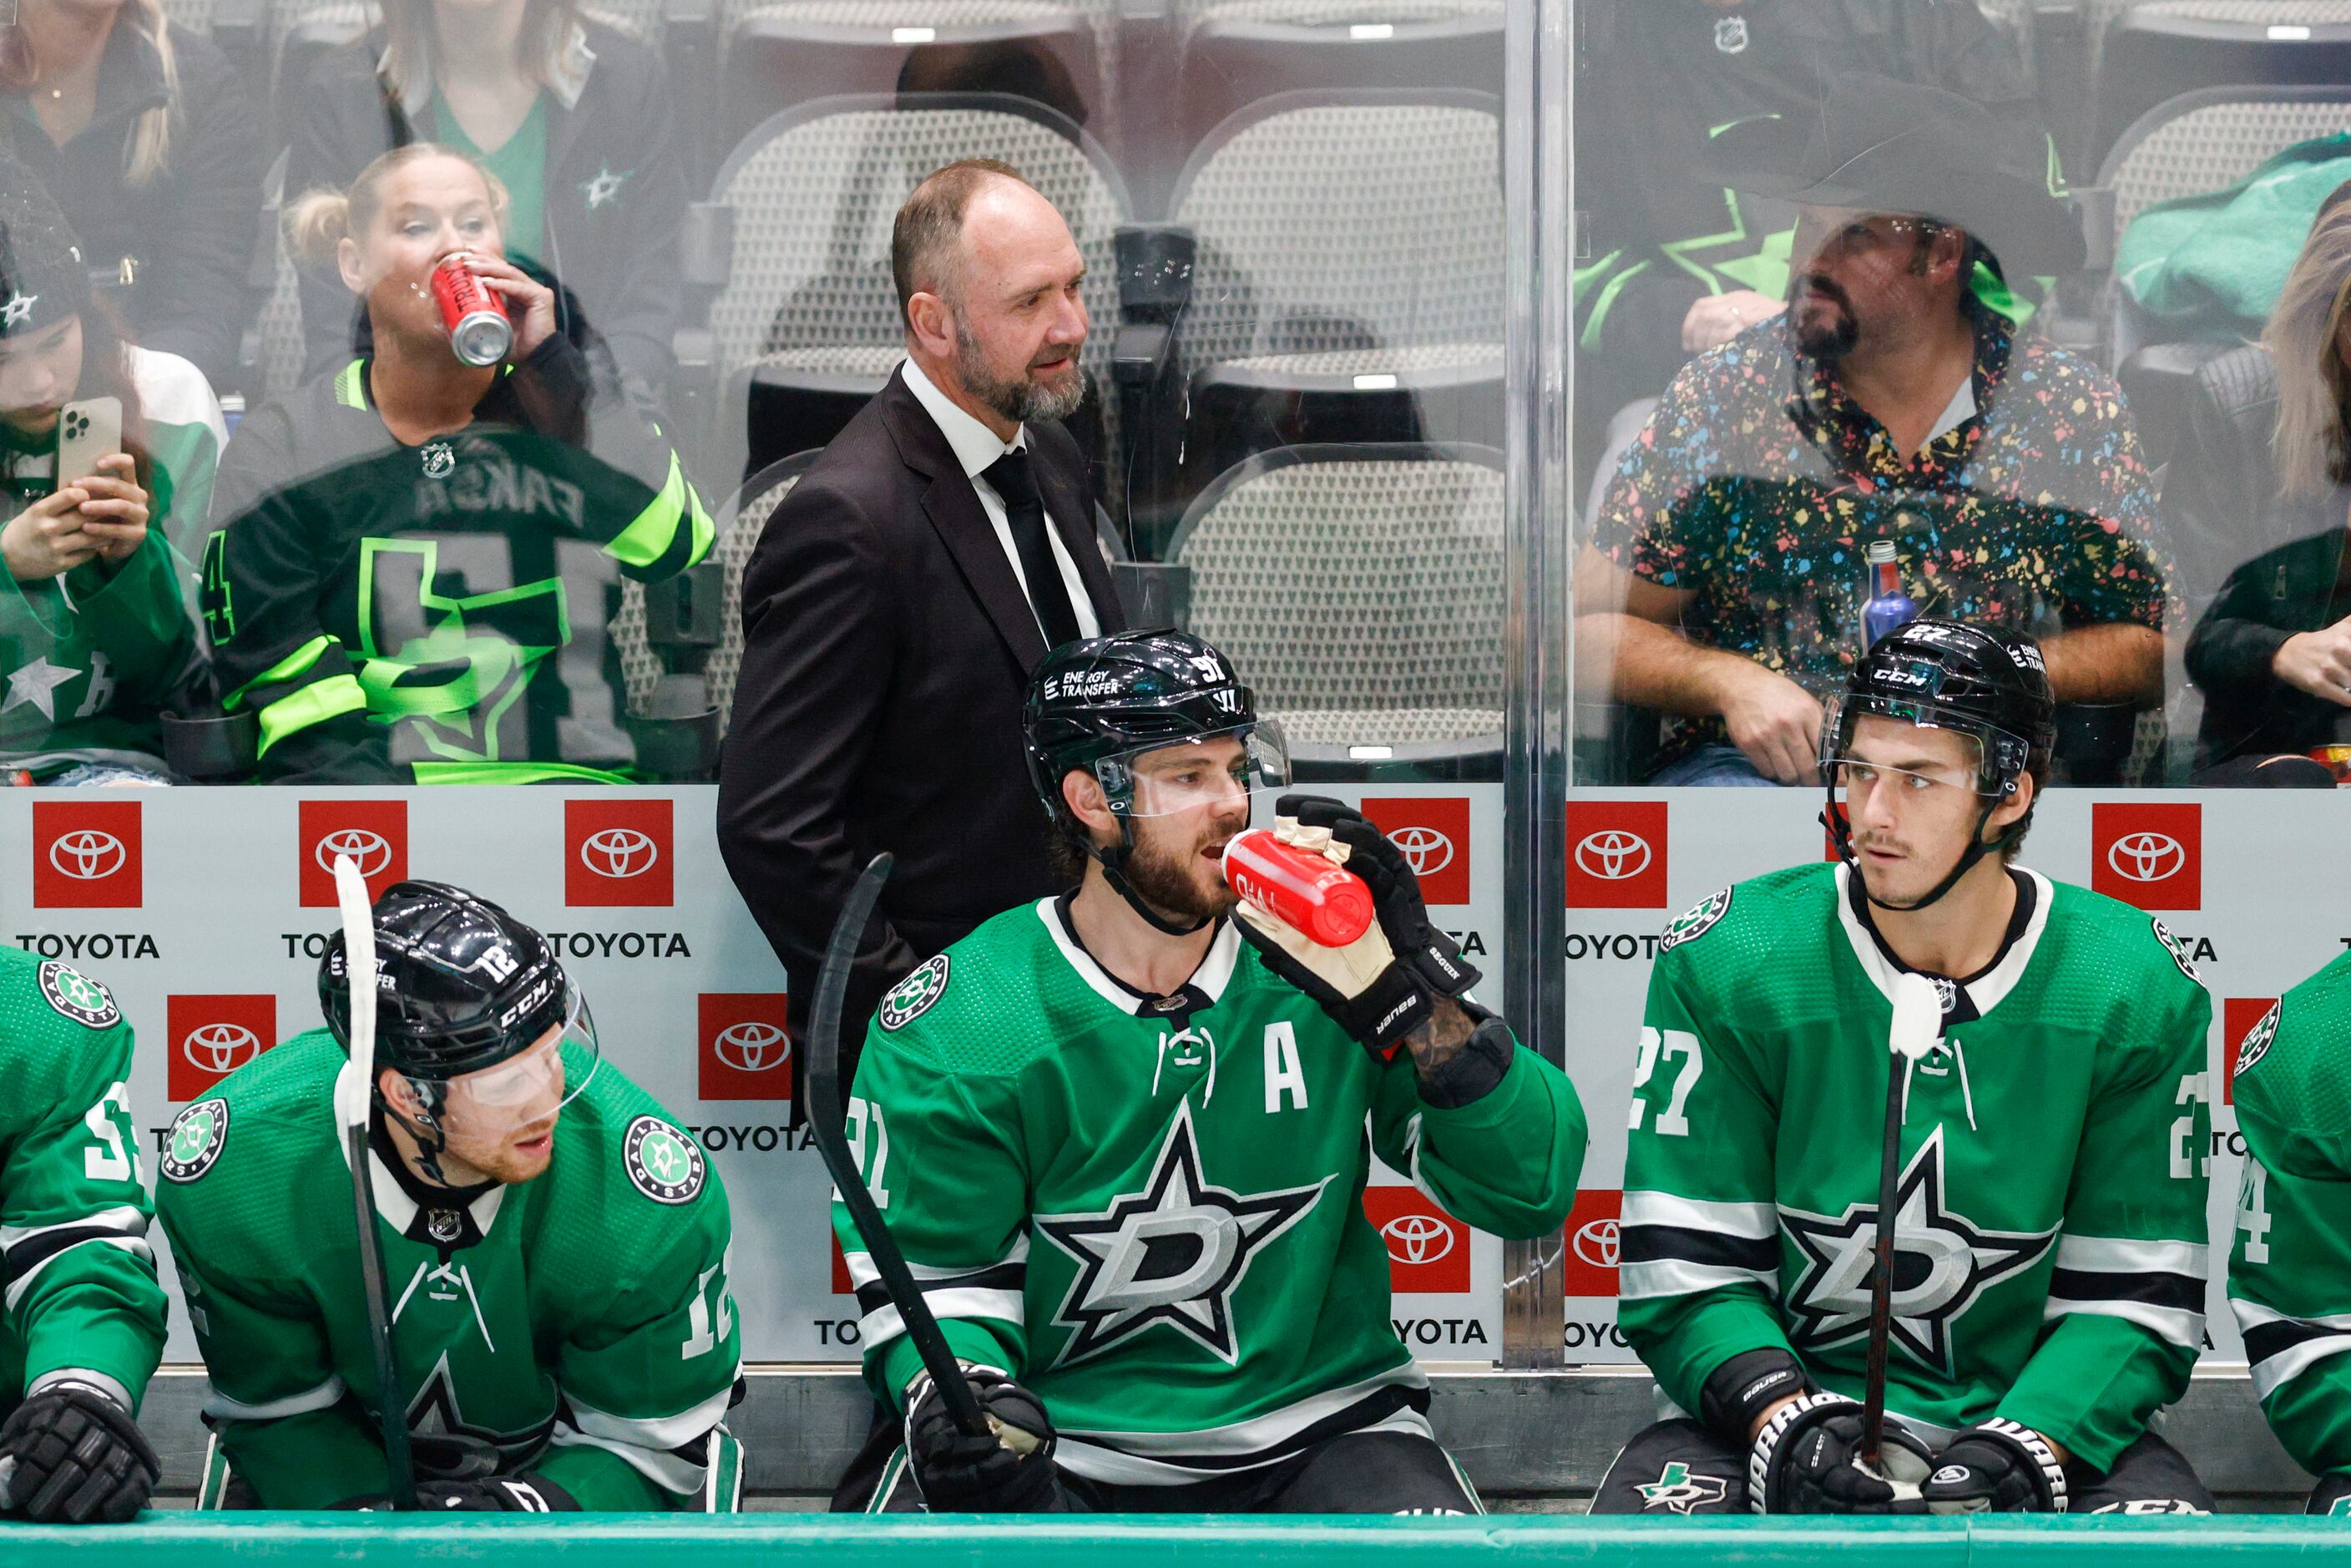 Oettinger's bad night causes Dallas Stars to lose 7-4 to the Rangers